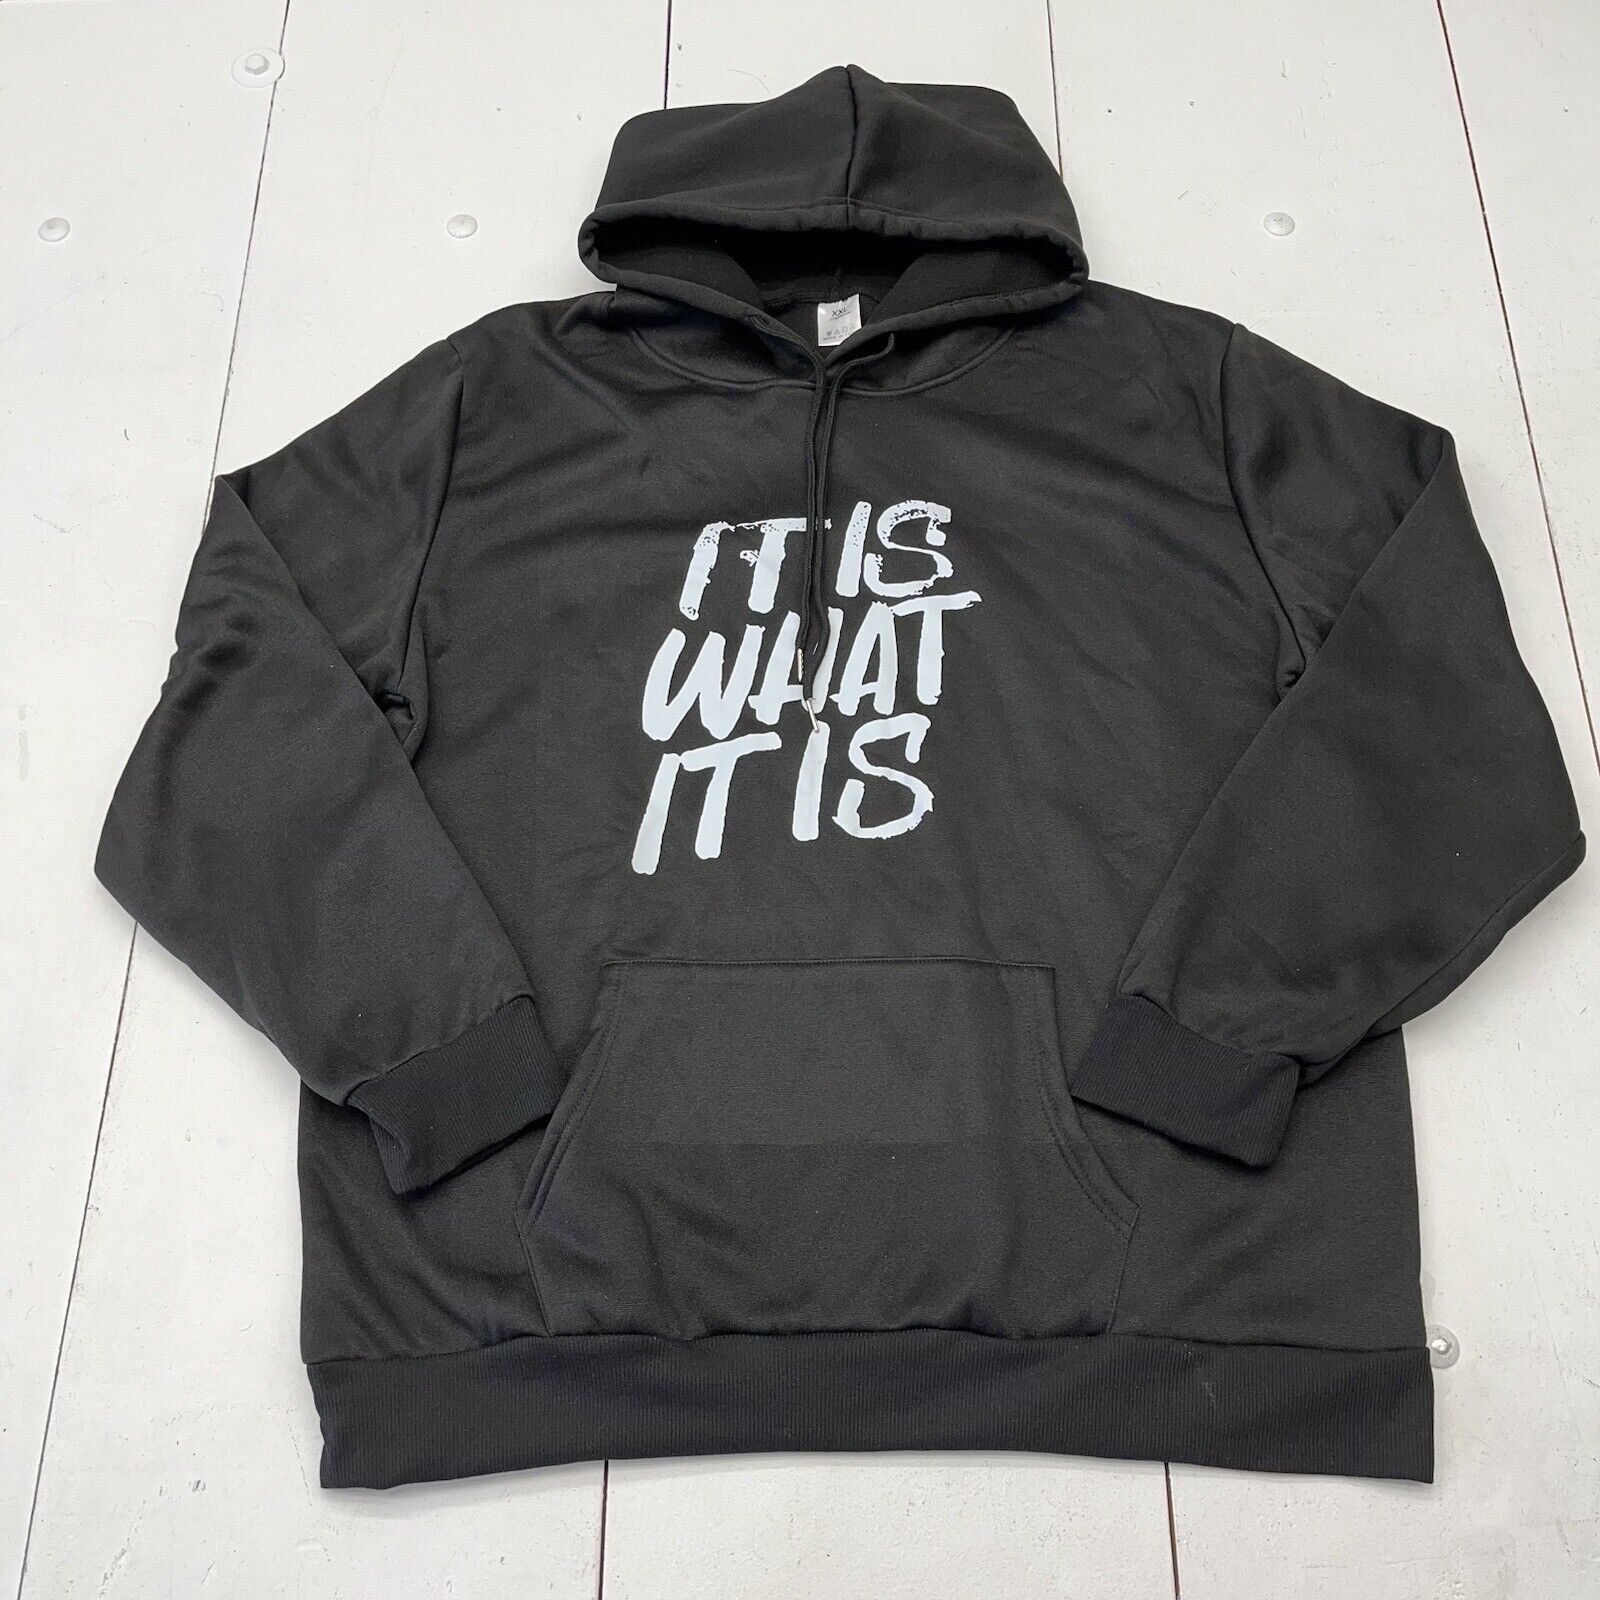 Black Hooded Long Sleeve Sweatshirt ‘It Is What It Is’ Front Graphic Adult 2XL